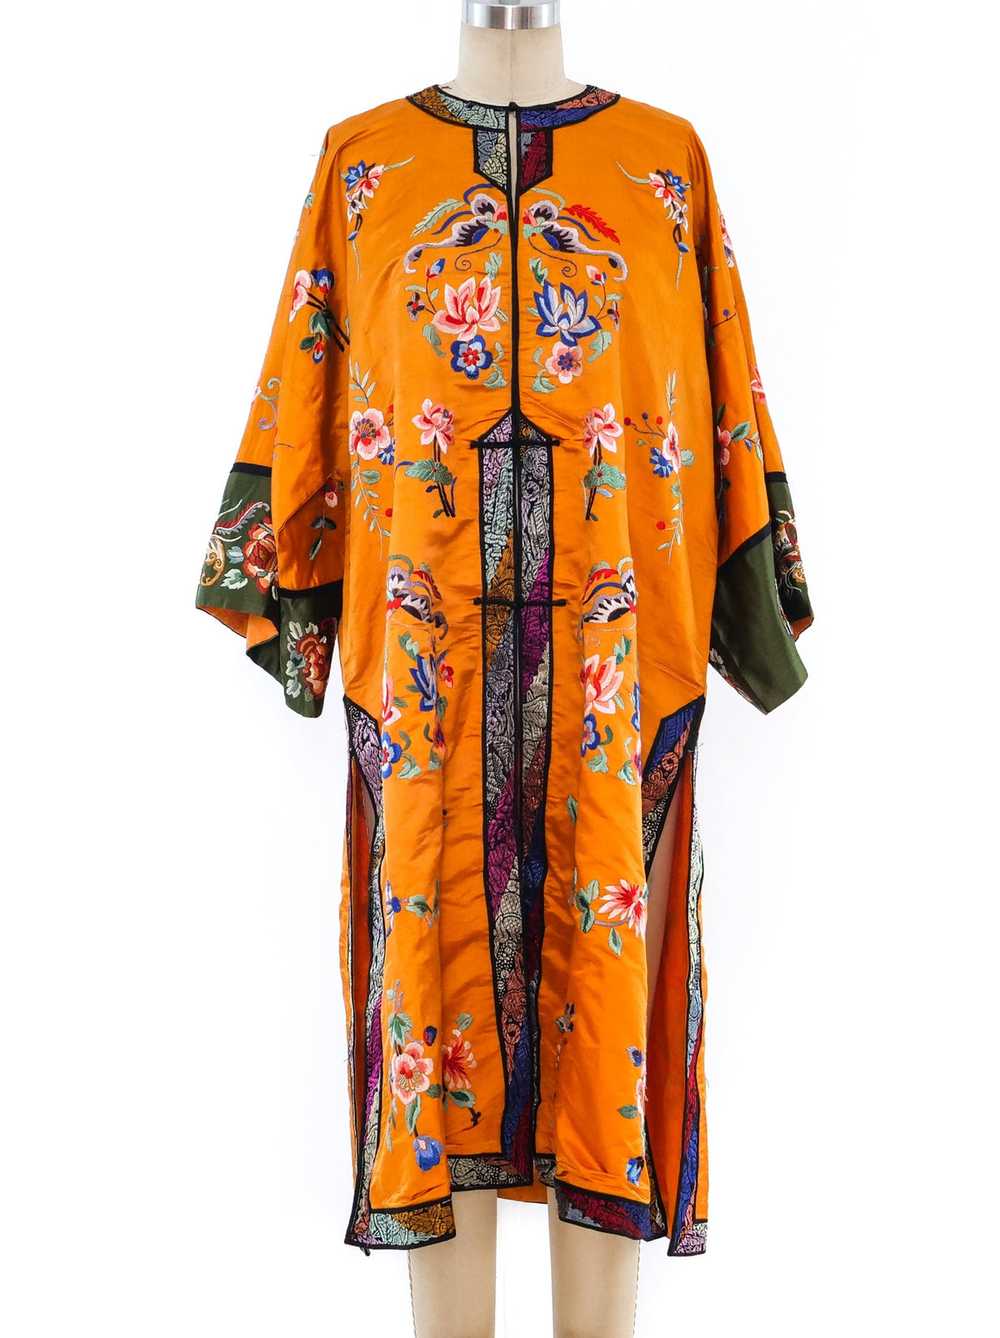 Embroidered Silk Chinese Jacket - image 3